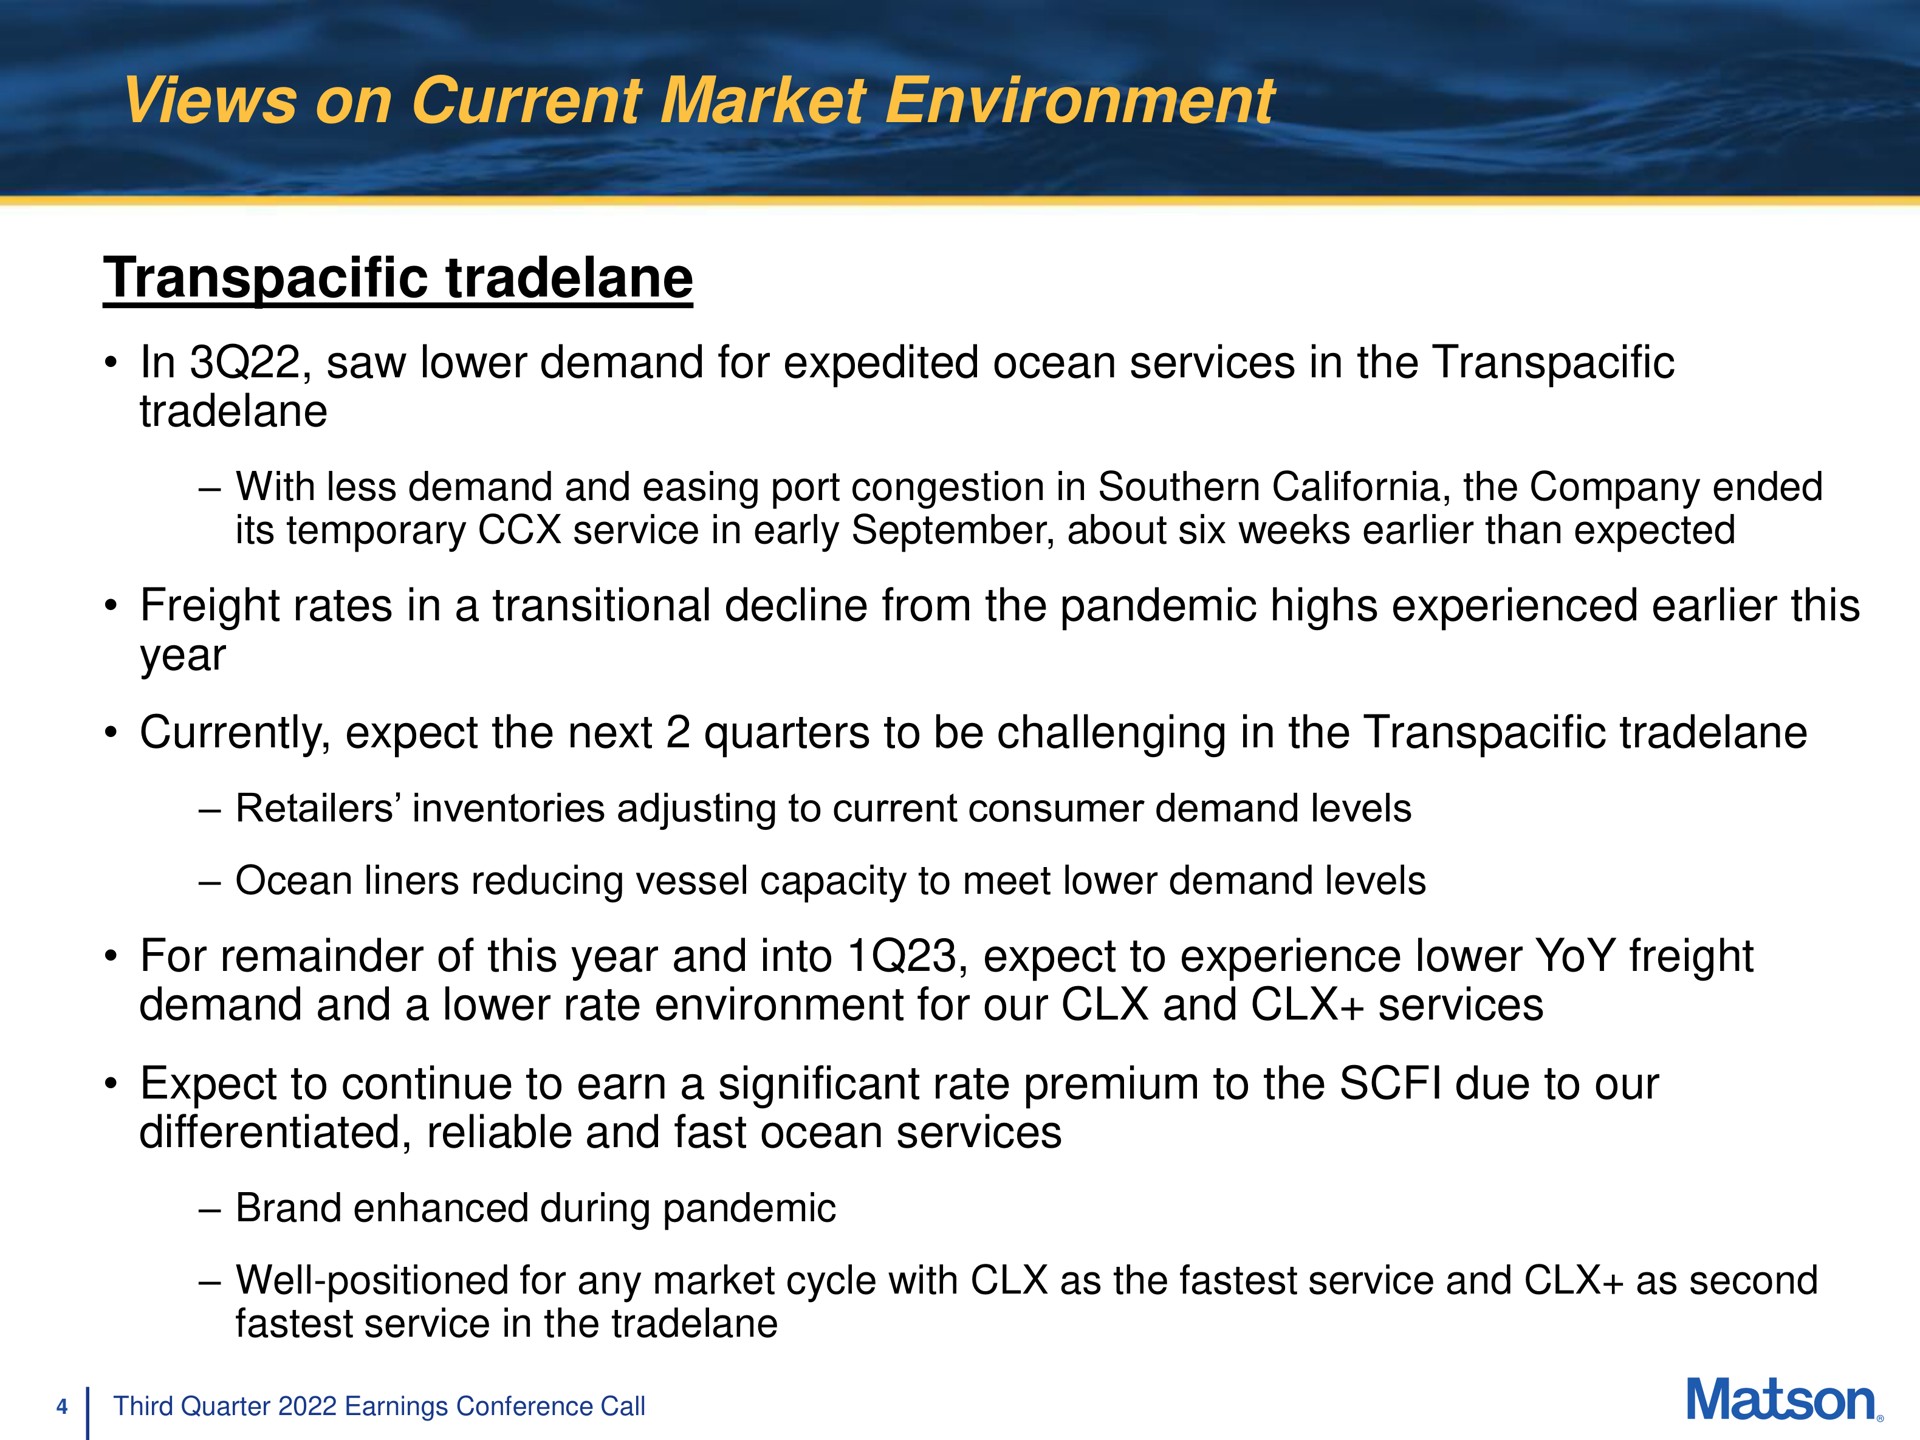 views on current market environment transpacific in saw lower demand for expedited ocean services in the freight rates in a transitional decline from the pandemic highs experienced this year currently expect the next quarters to be challenging in the for remainder of this year and into expect to experience lower yoy freight expect to continue to earn a significant rate premium to the due to our differentiated reliable and fast ocean services | Matson